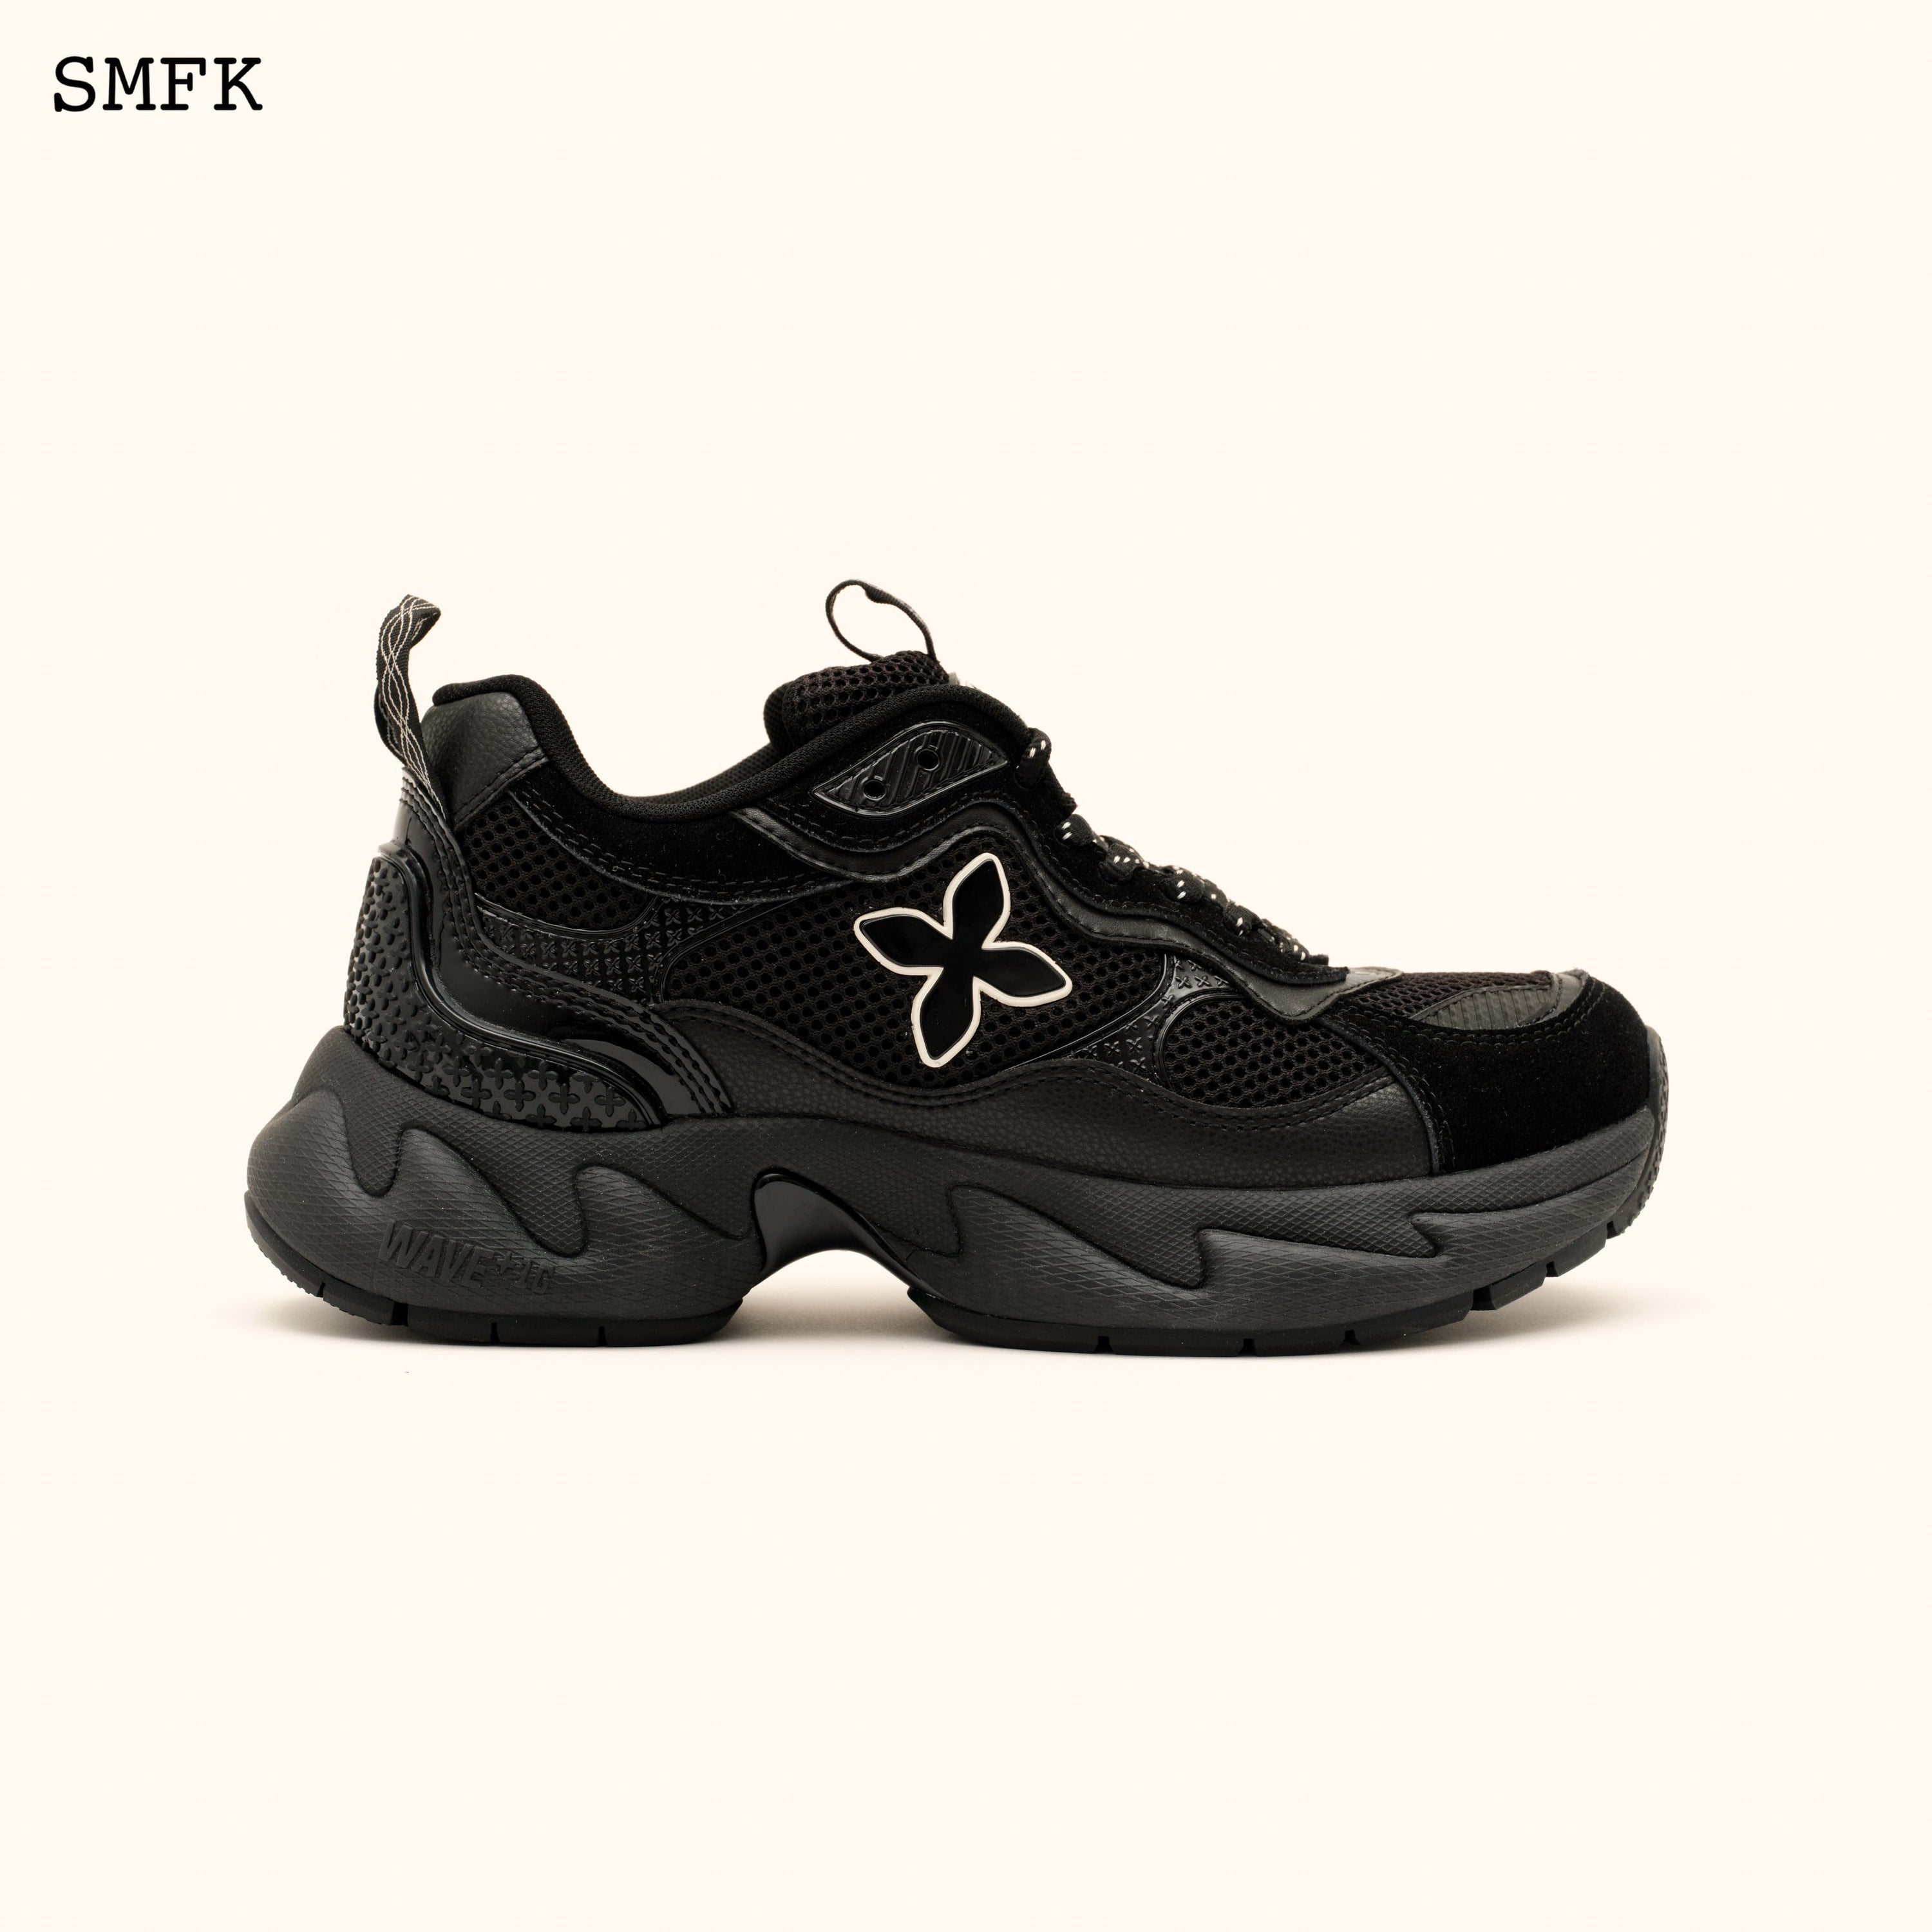 Compass Wave Retro Jogging Shoes In Black - SMFK Official